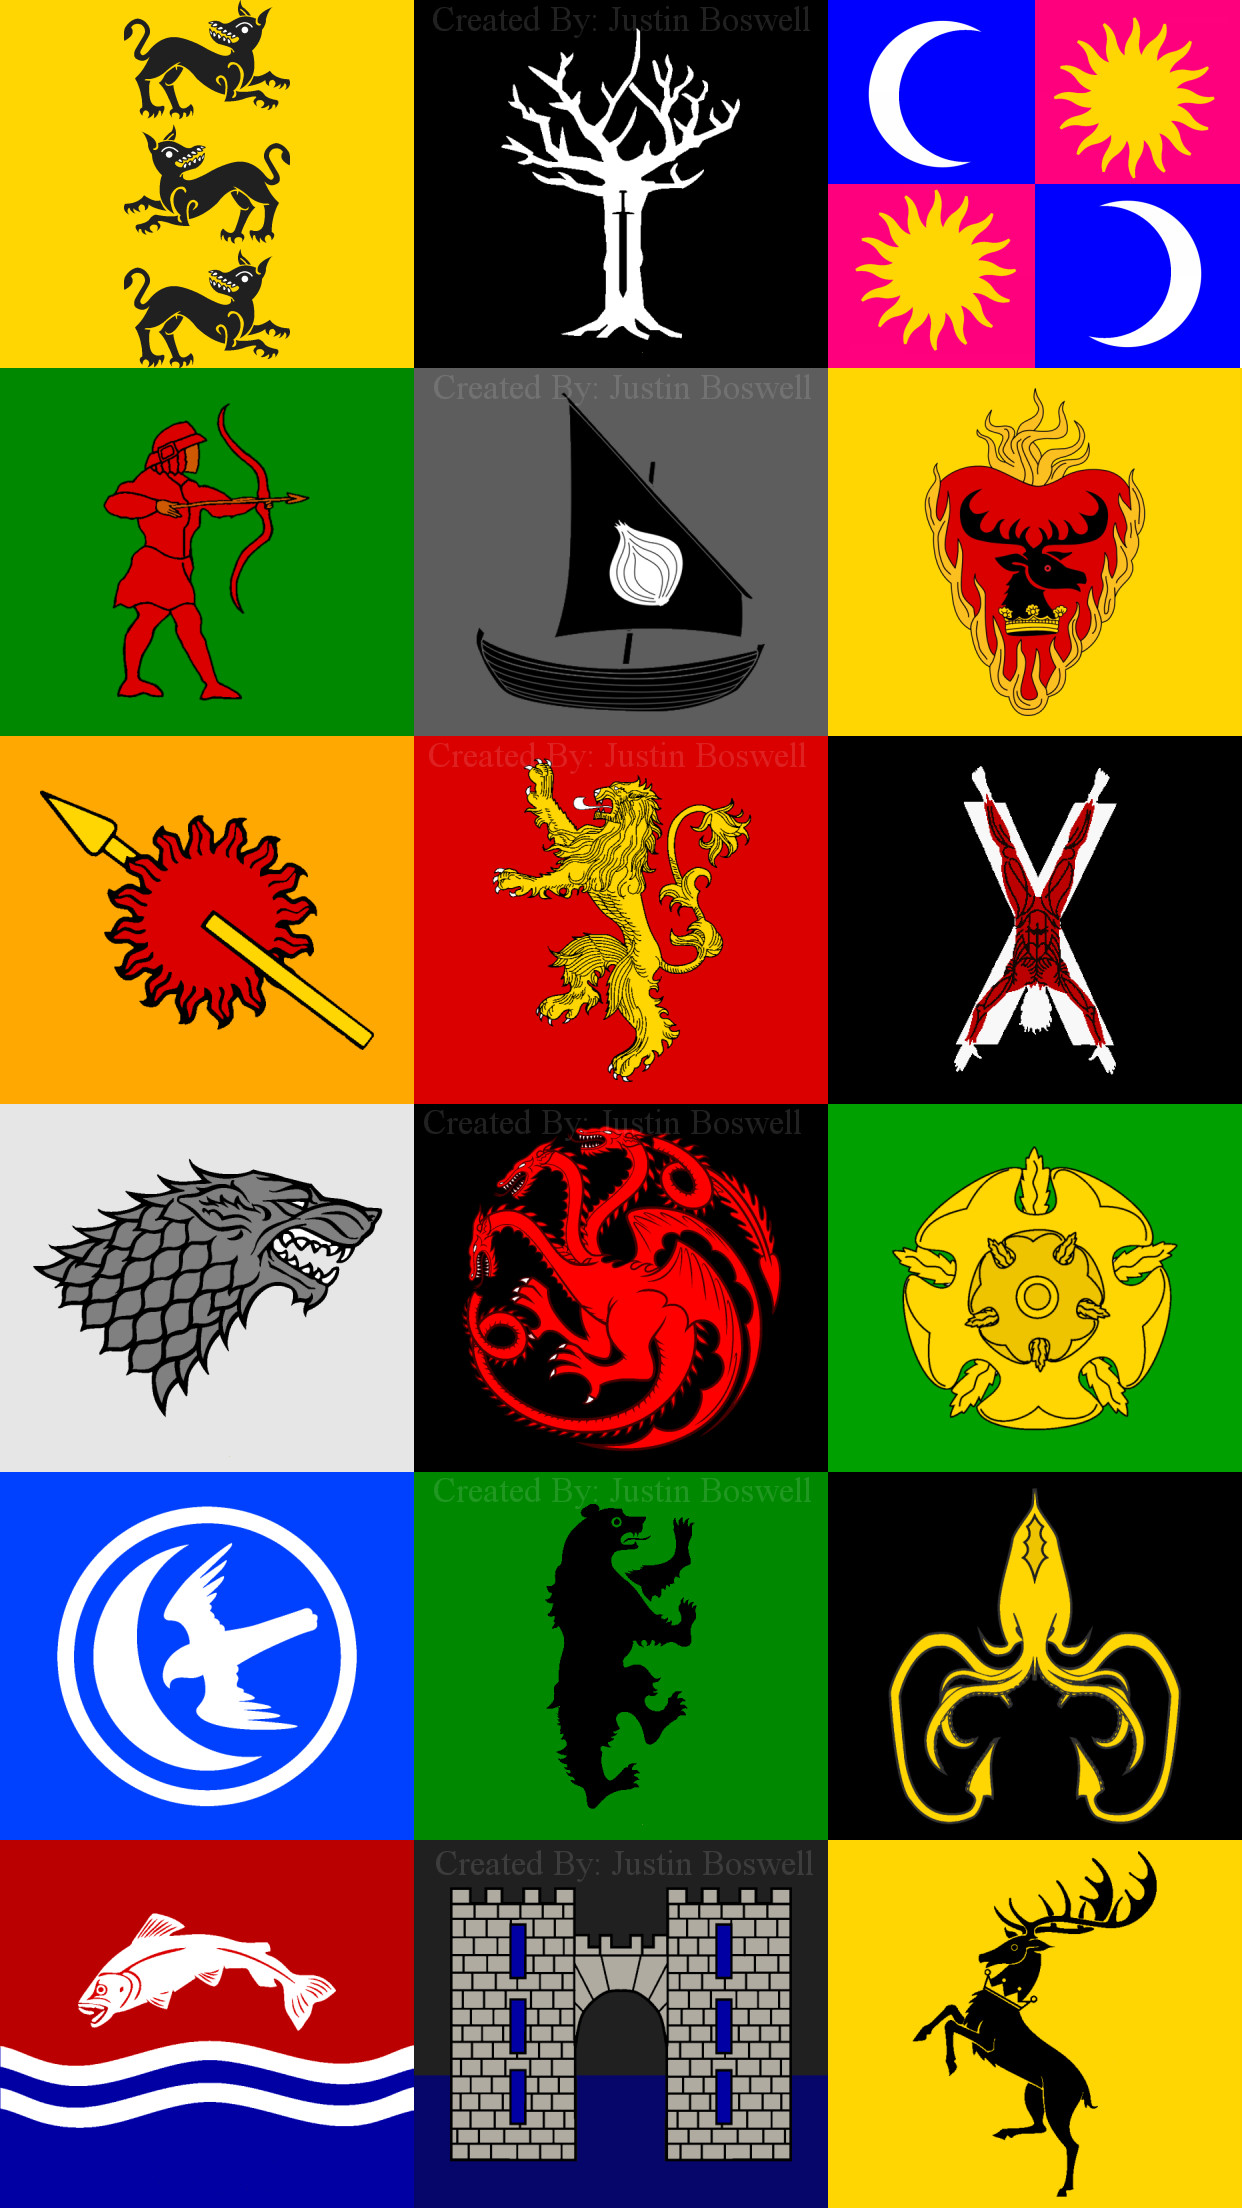 Game of Thrones iPhone 7 plus with Border House Sigil Wallpaper Houses  Clegane Forrester, Tarth Tarly Seaworth Baratheon Martell Lannister Bolton  Stark …